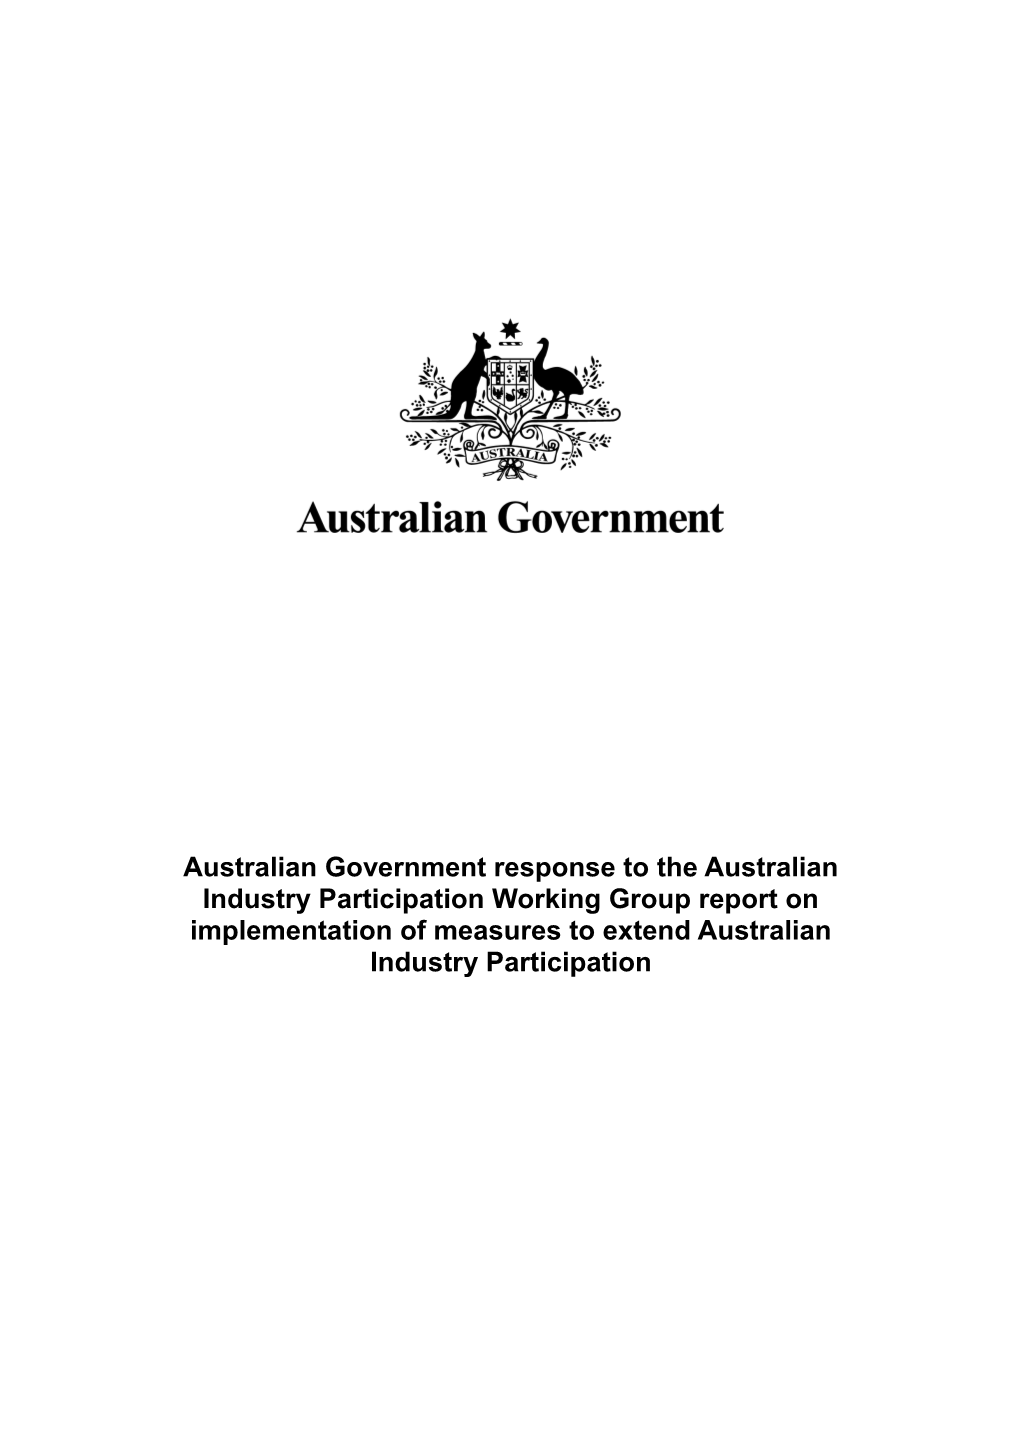 Australian Government Response to the AIP Working Group Report